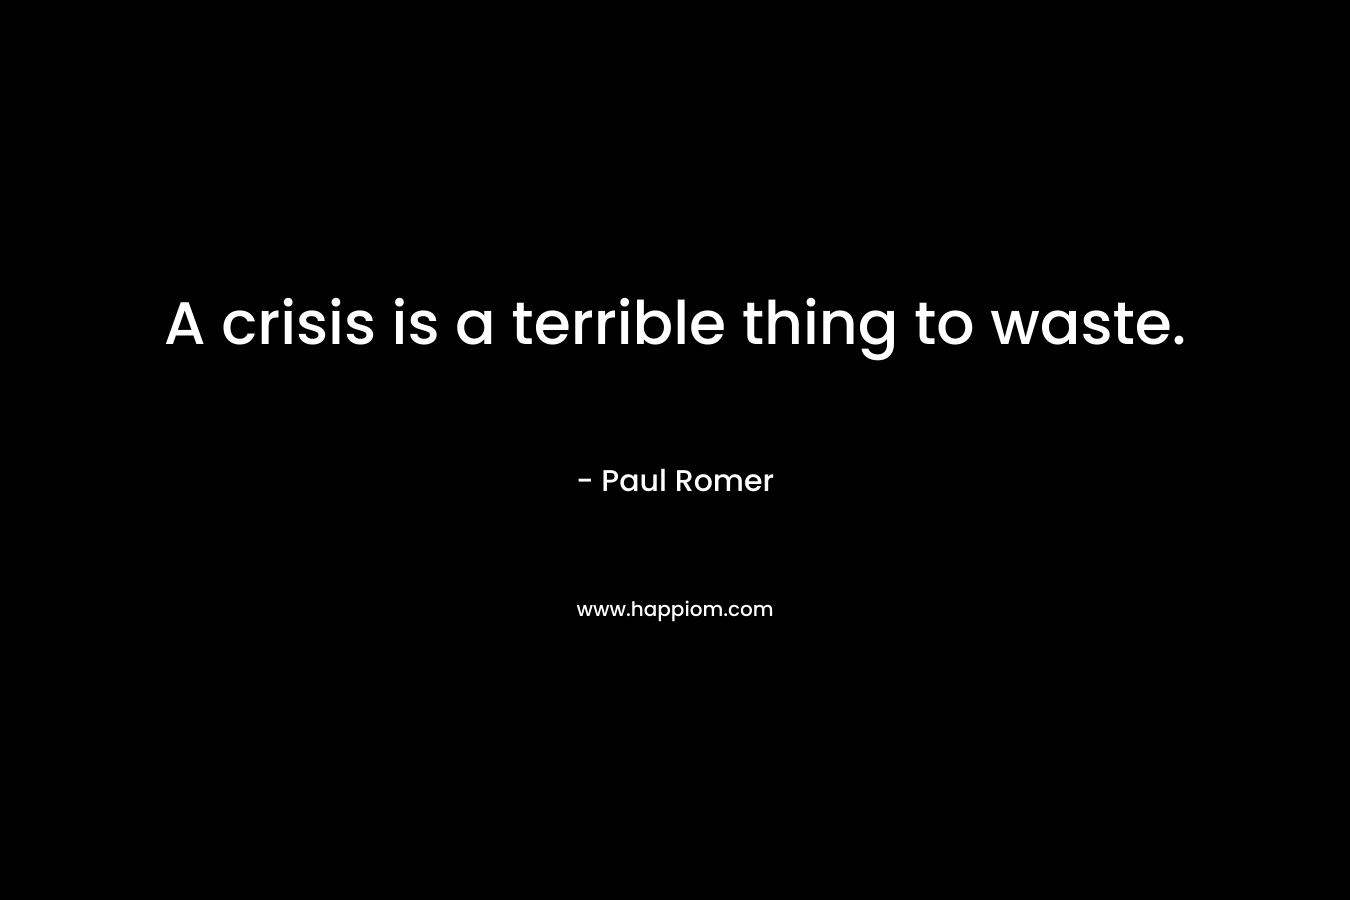 A crisis is a terrible thing to waste.